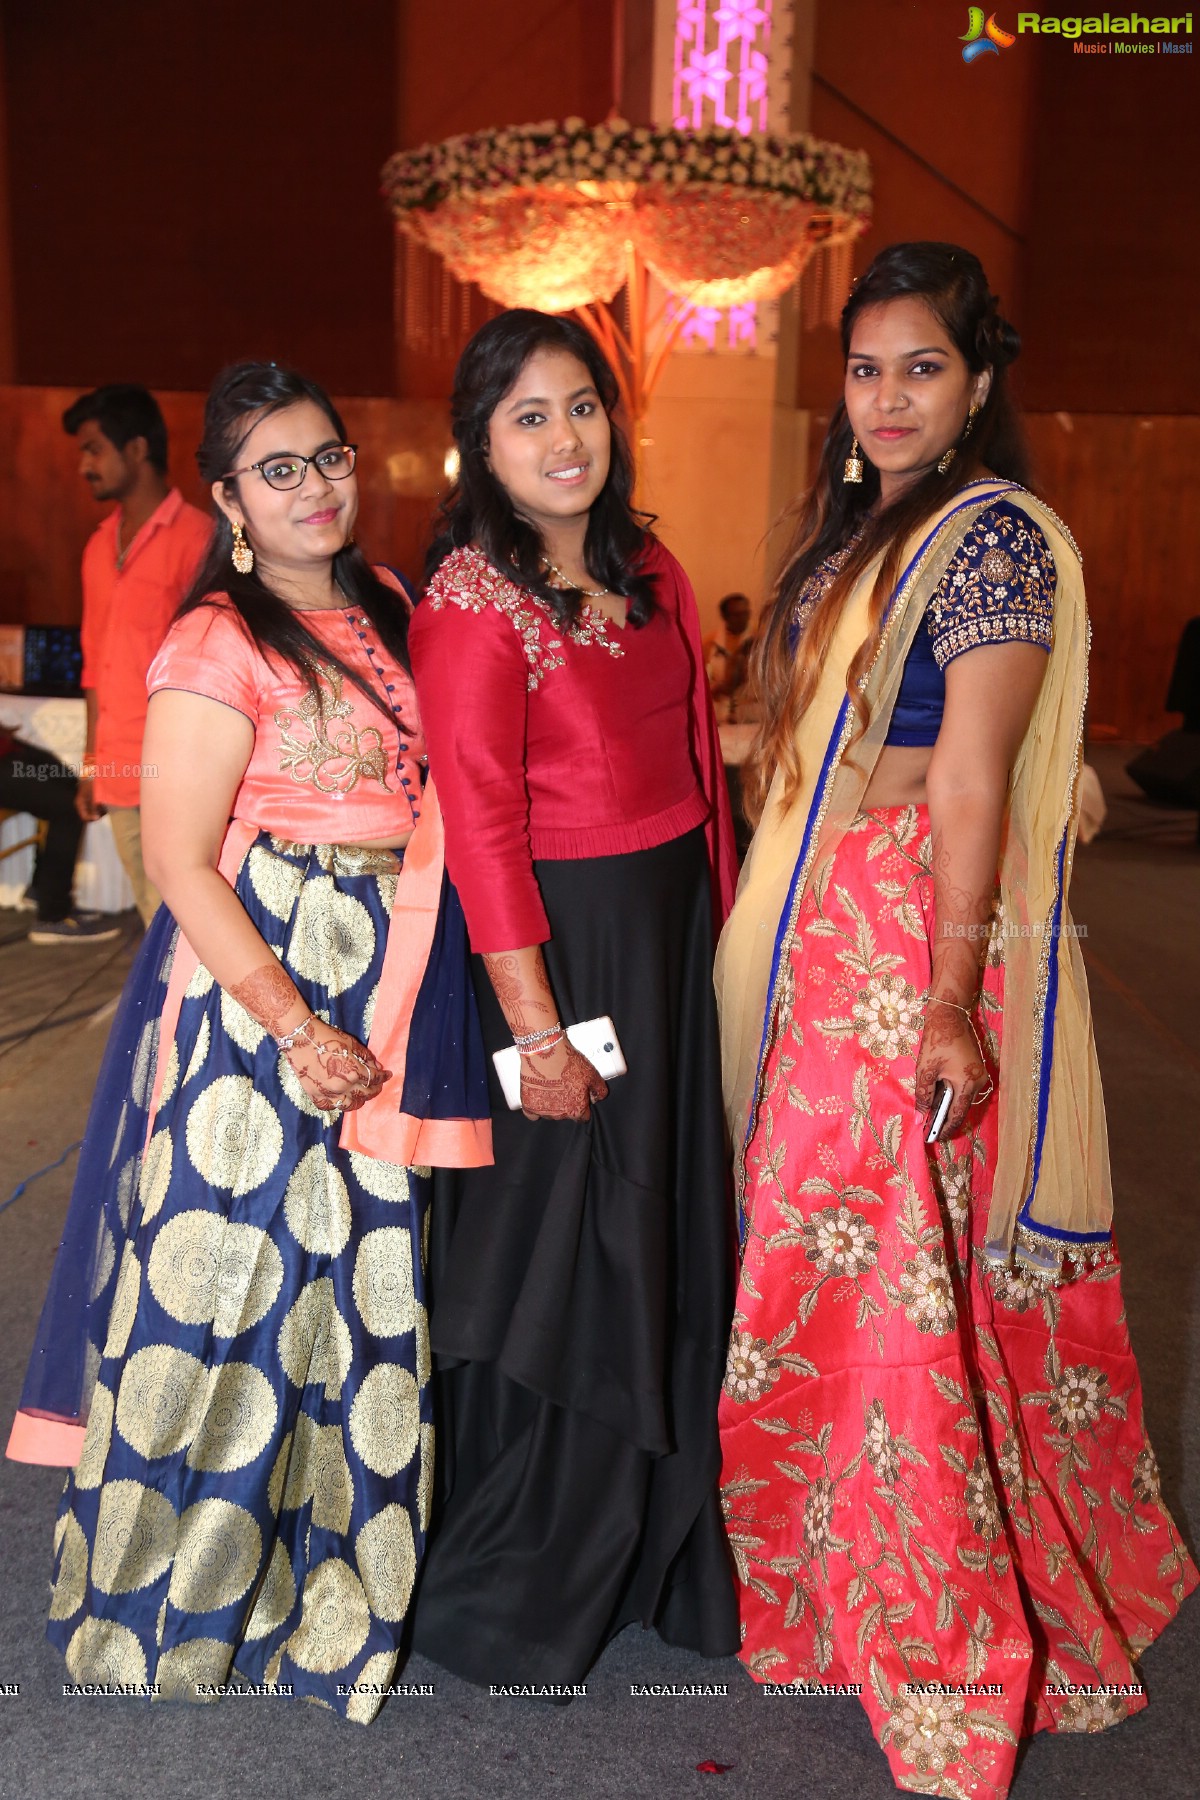 Grand Wedding of Prateek with Kashika at Classic Convention Center, Hyderabad